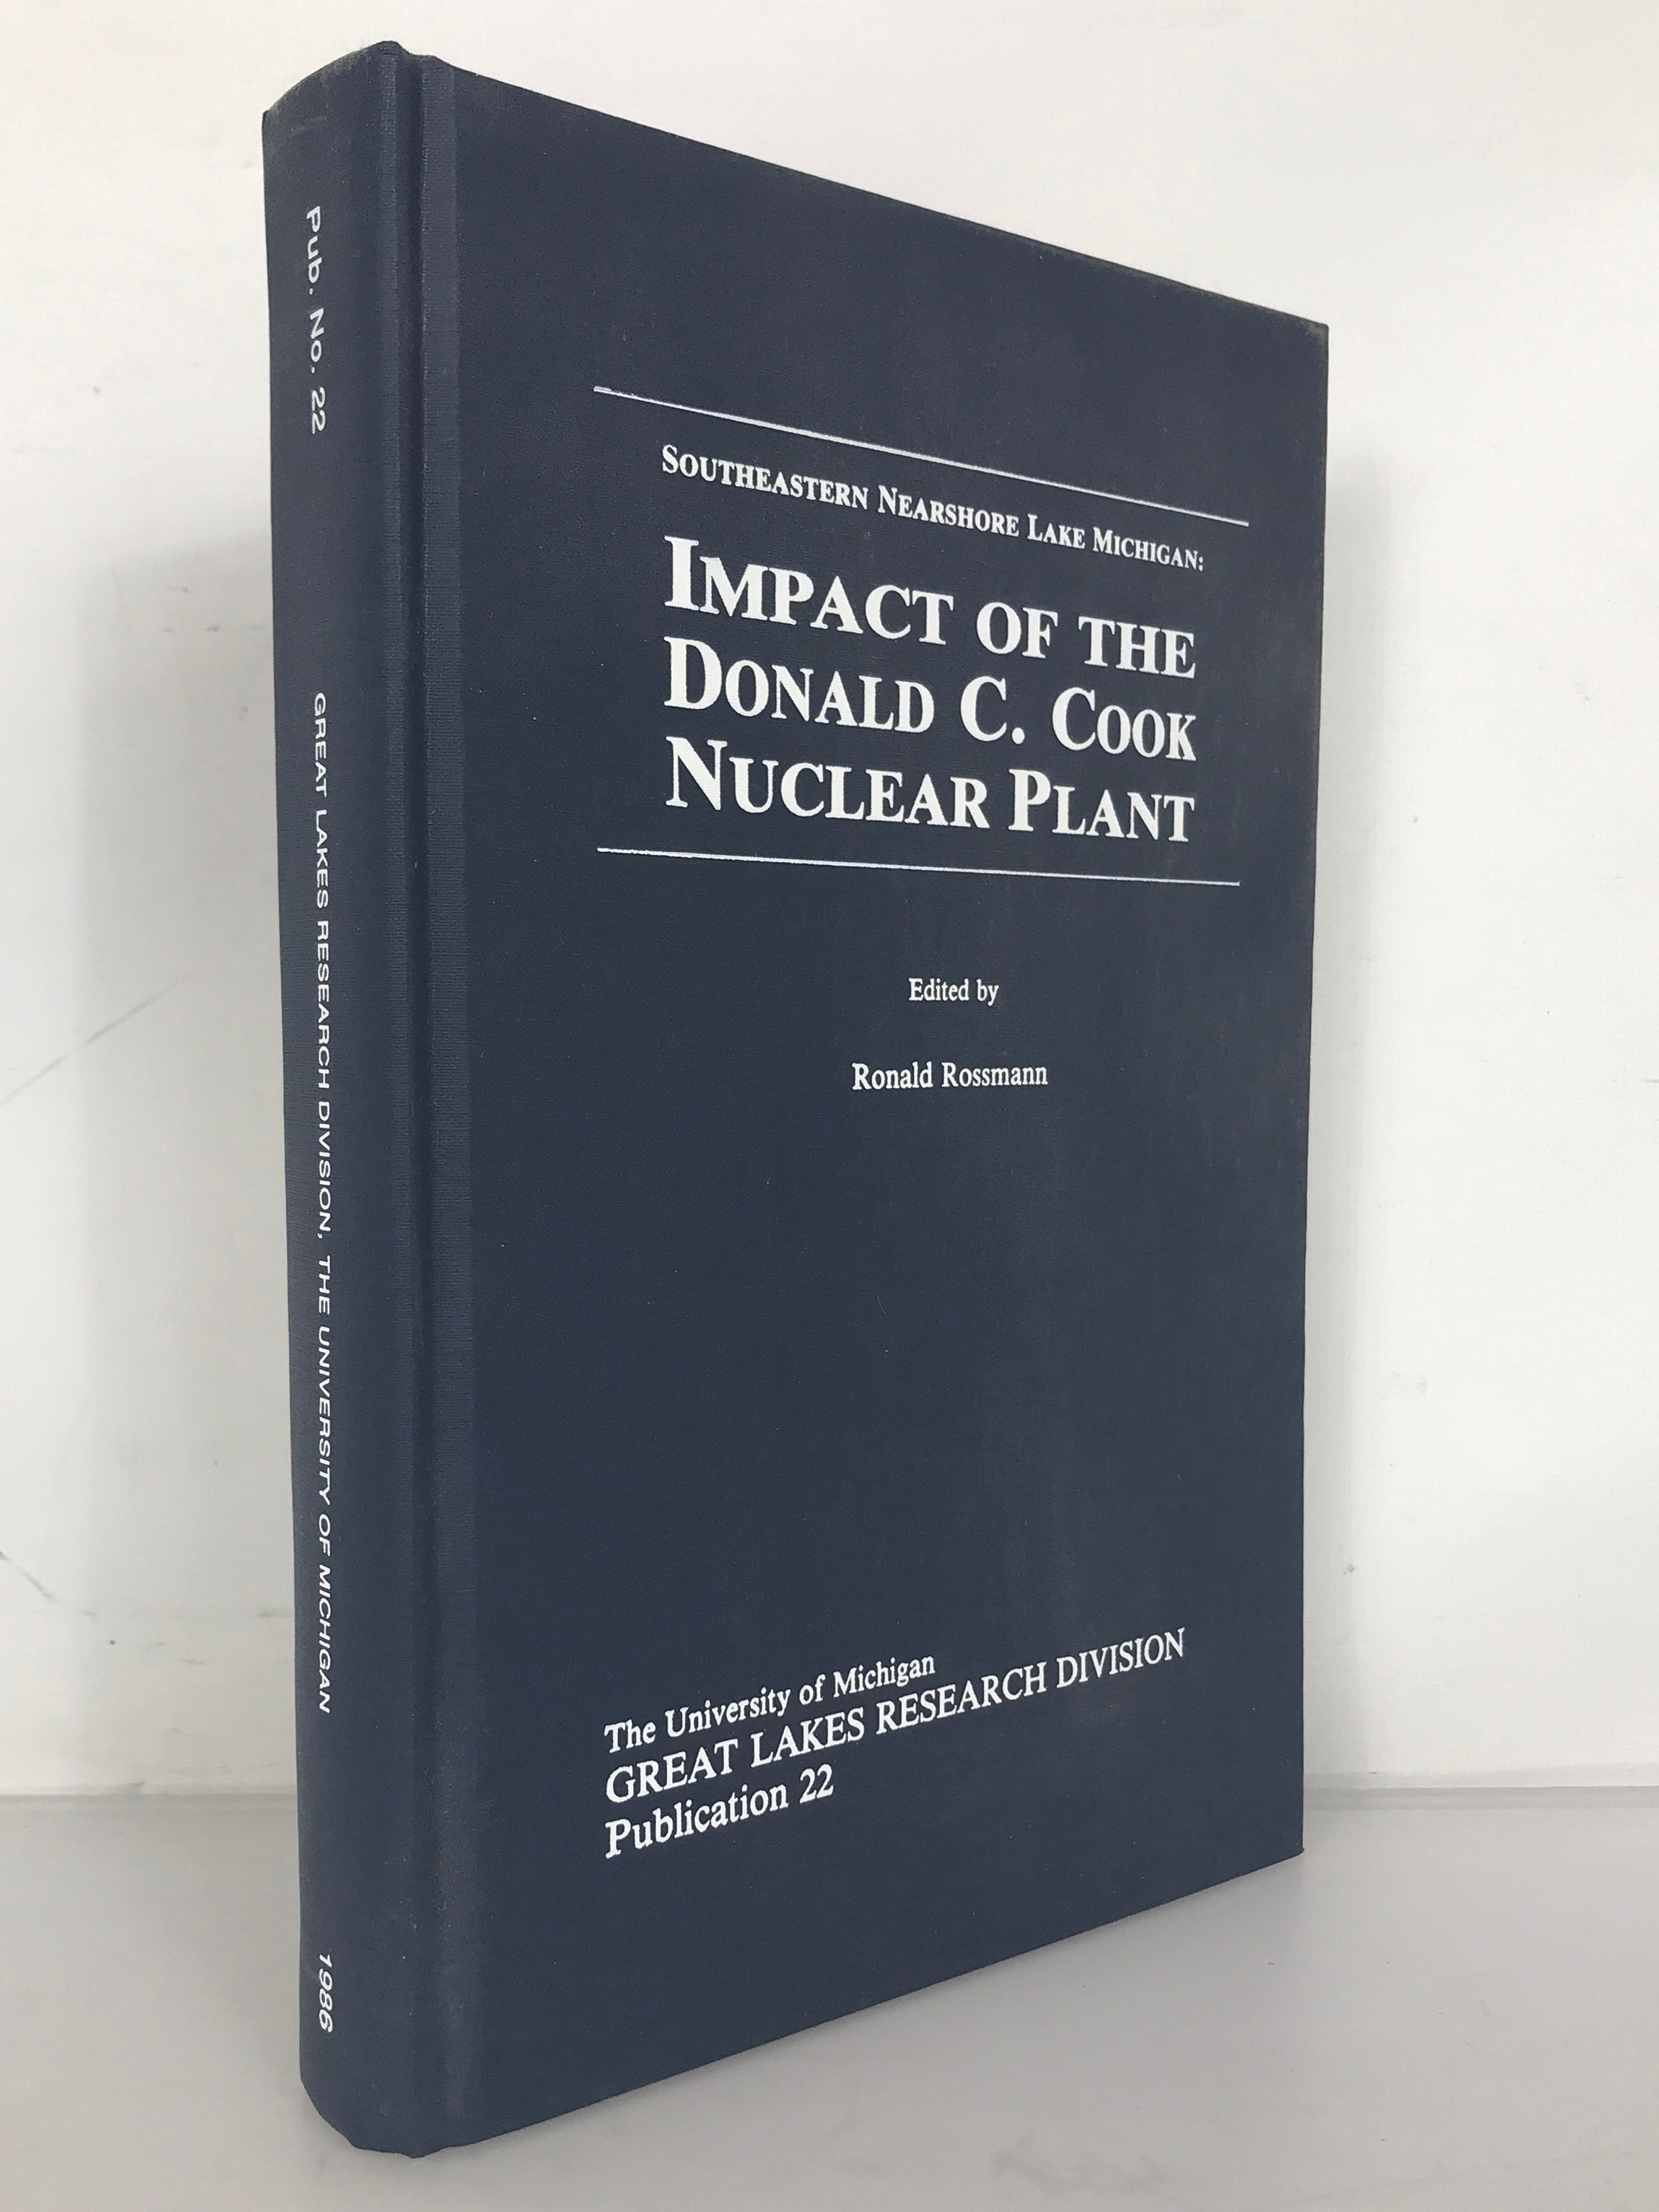 Impact of the Donald C. Cook Nuclear Plant by Ronald Rossman 1986 HC